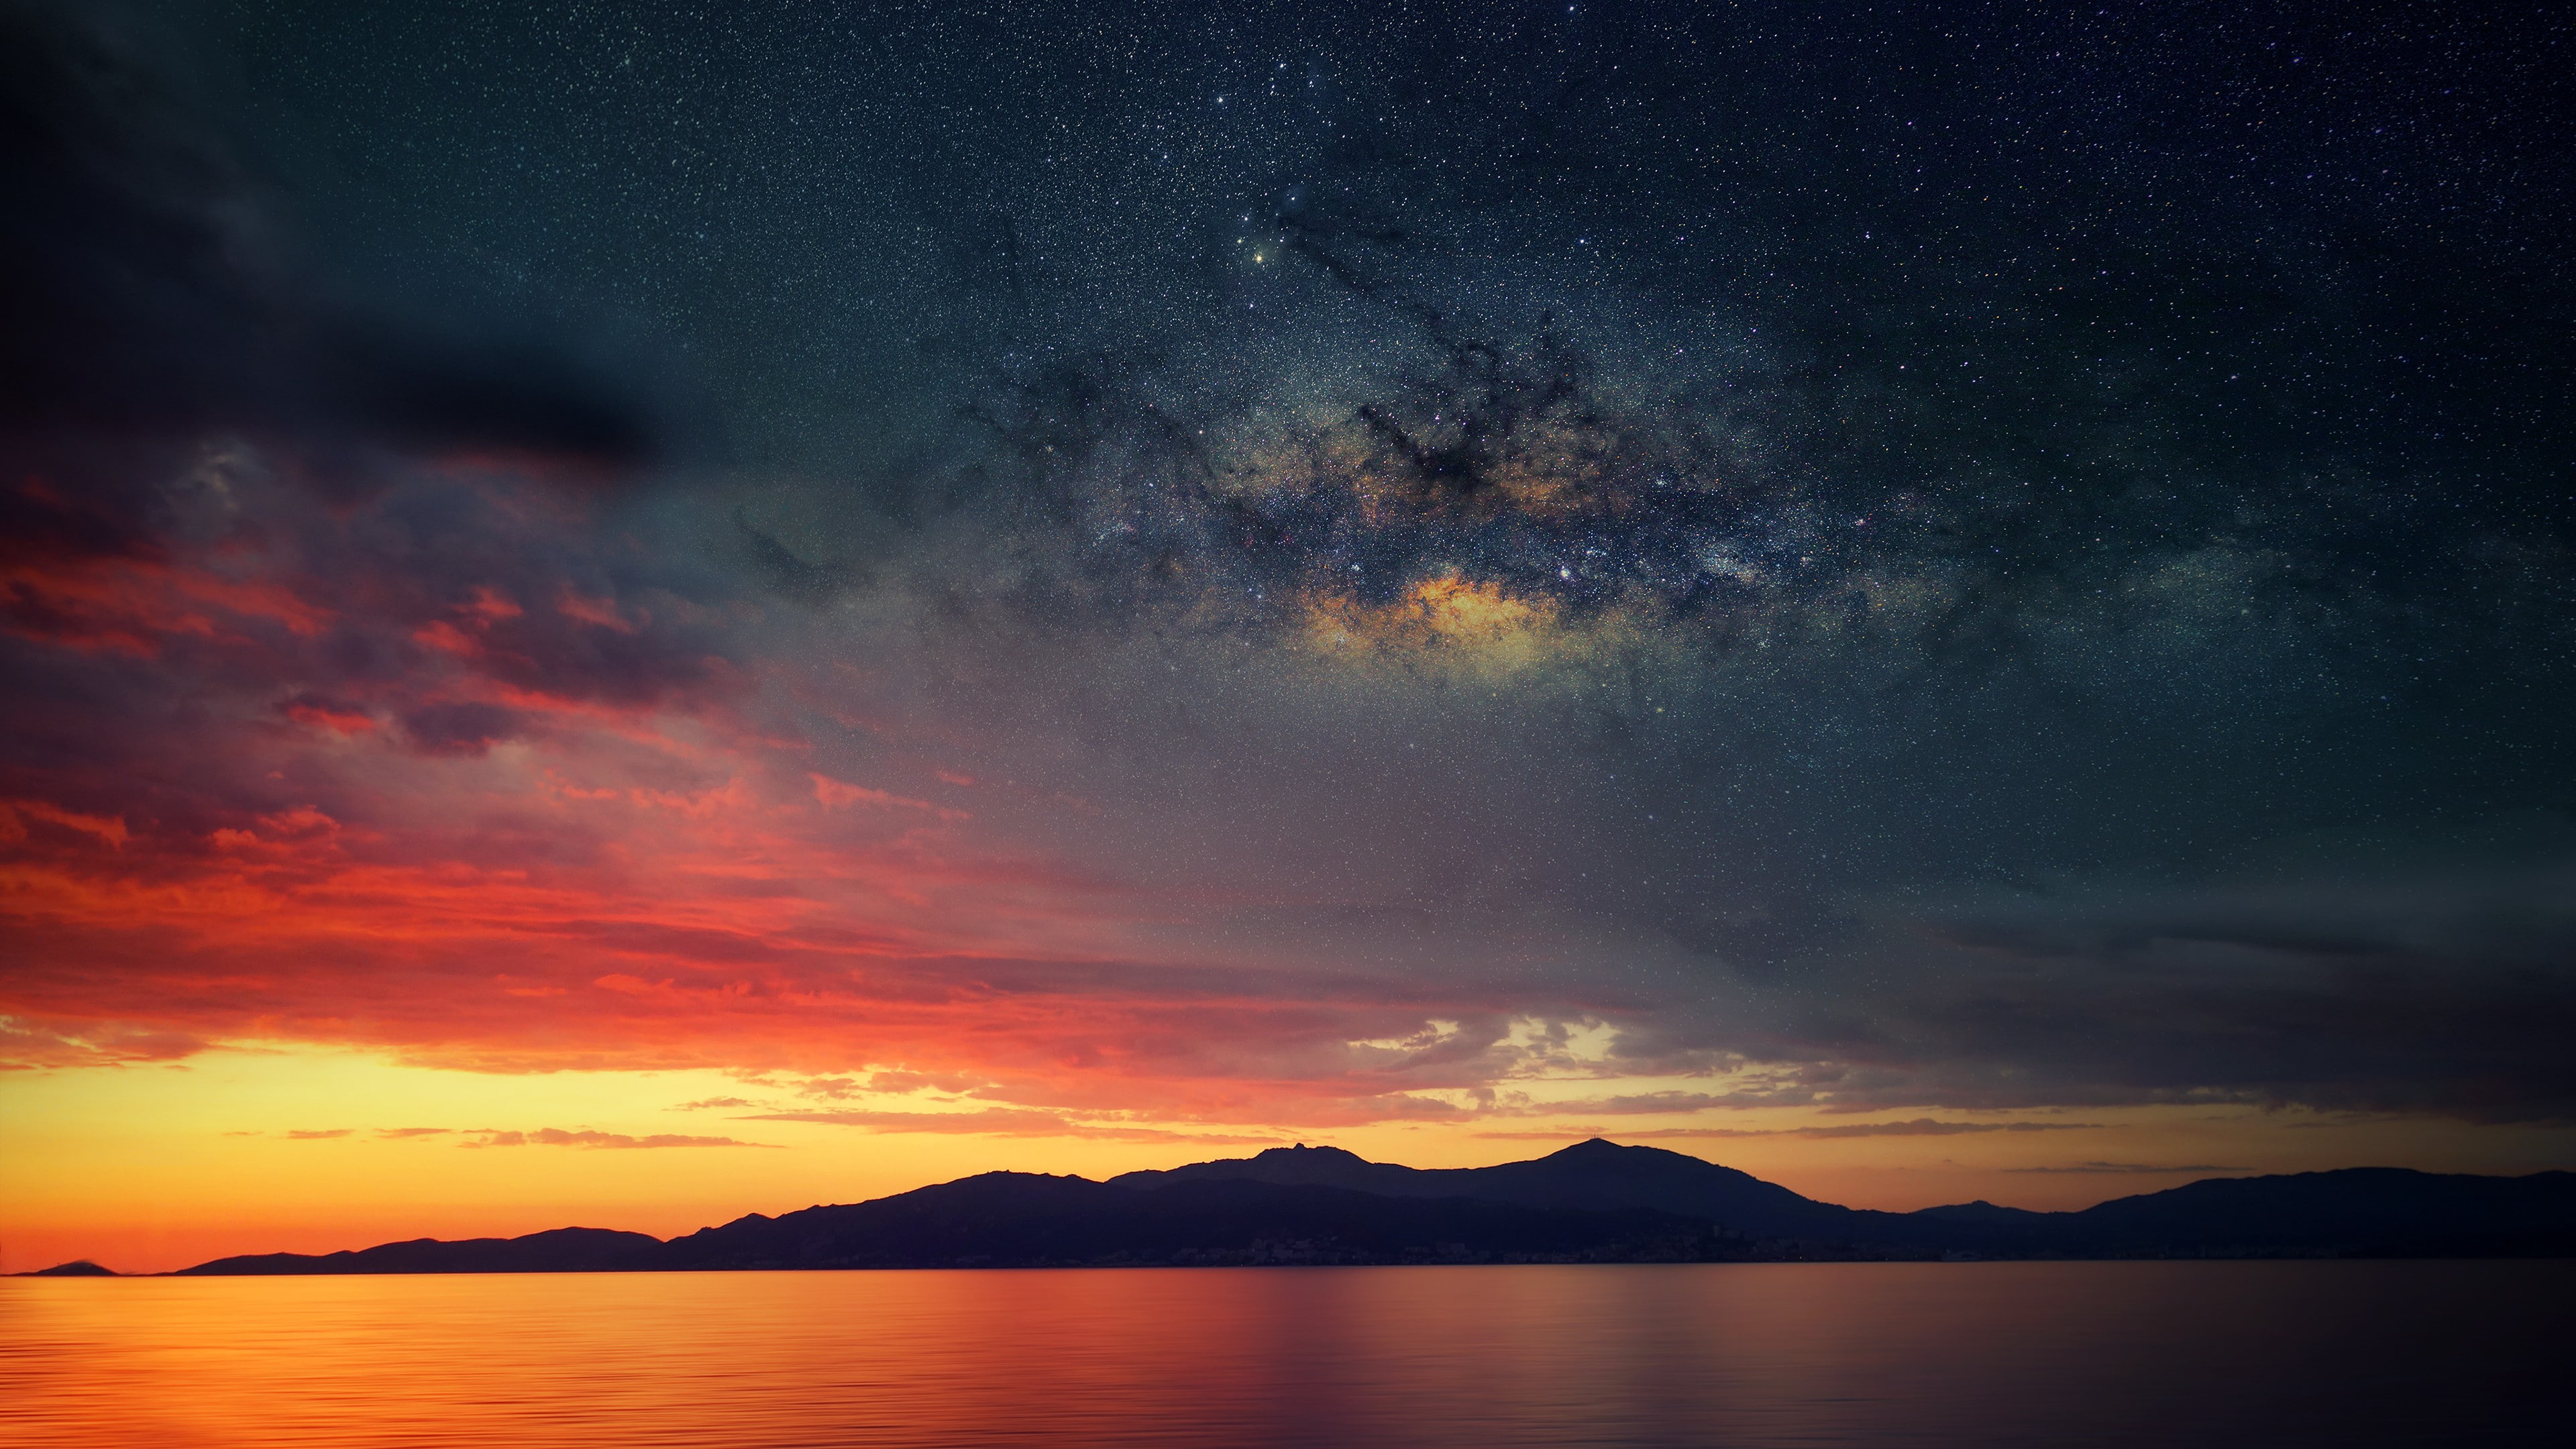 France, Corsica, clouds, stars, reflection, dusk, silhouette